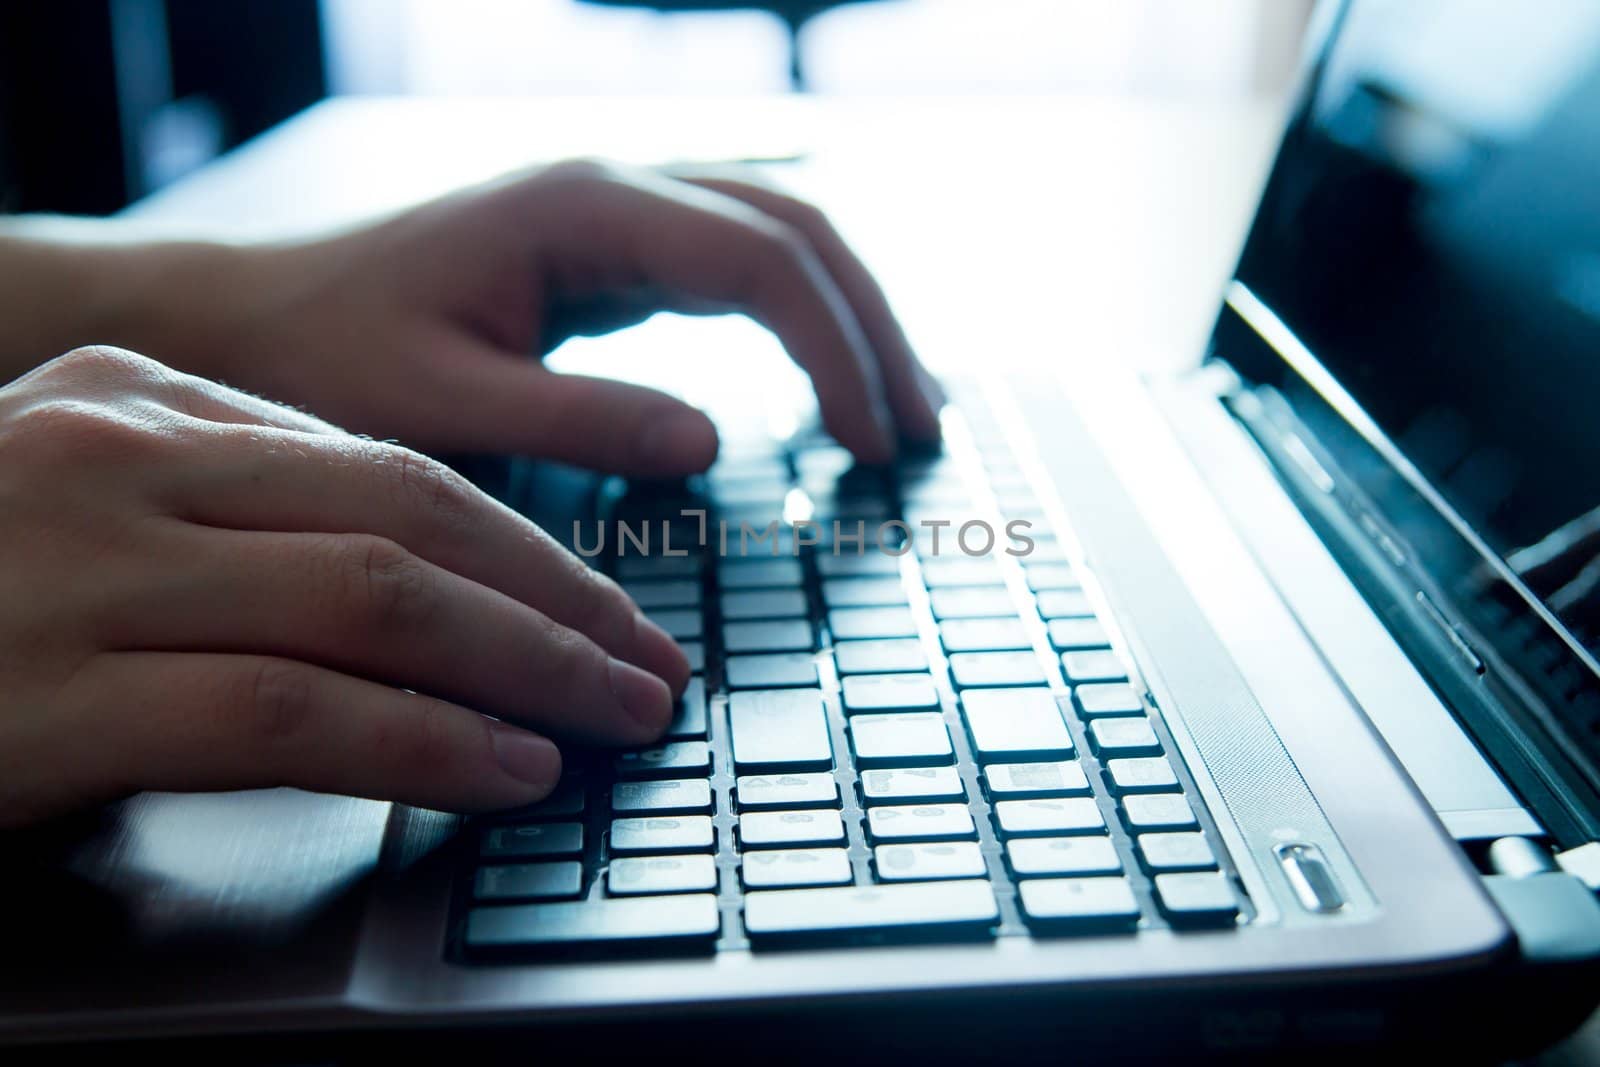 Close-up of human hands on keyboard